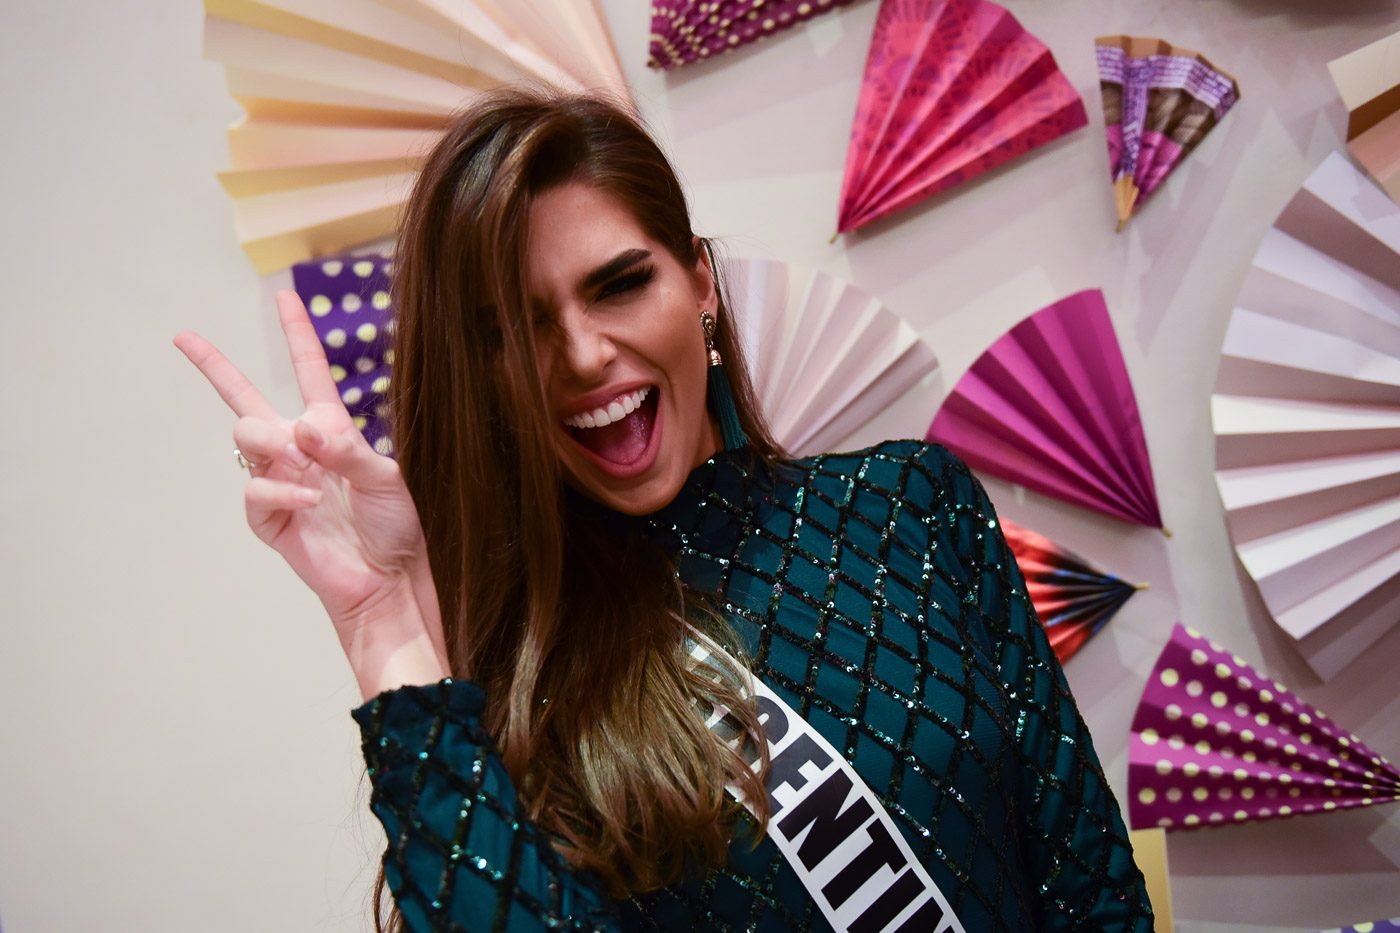 IN PHOTOS: Miss Universe 2016 candidates strike cute, wacky poses